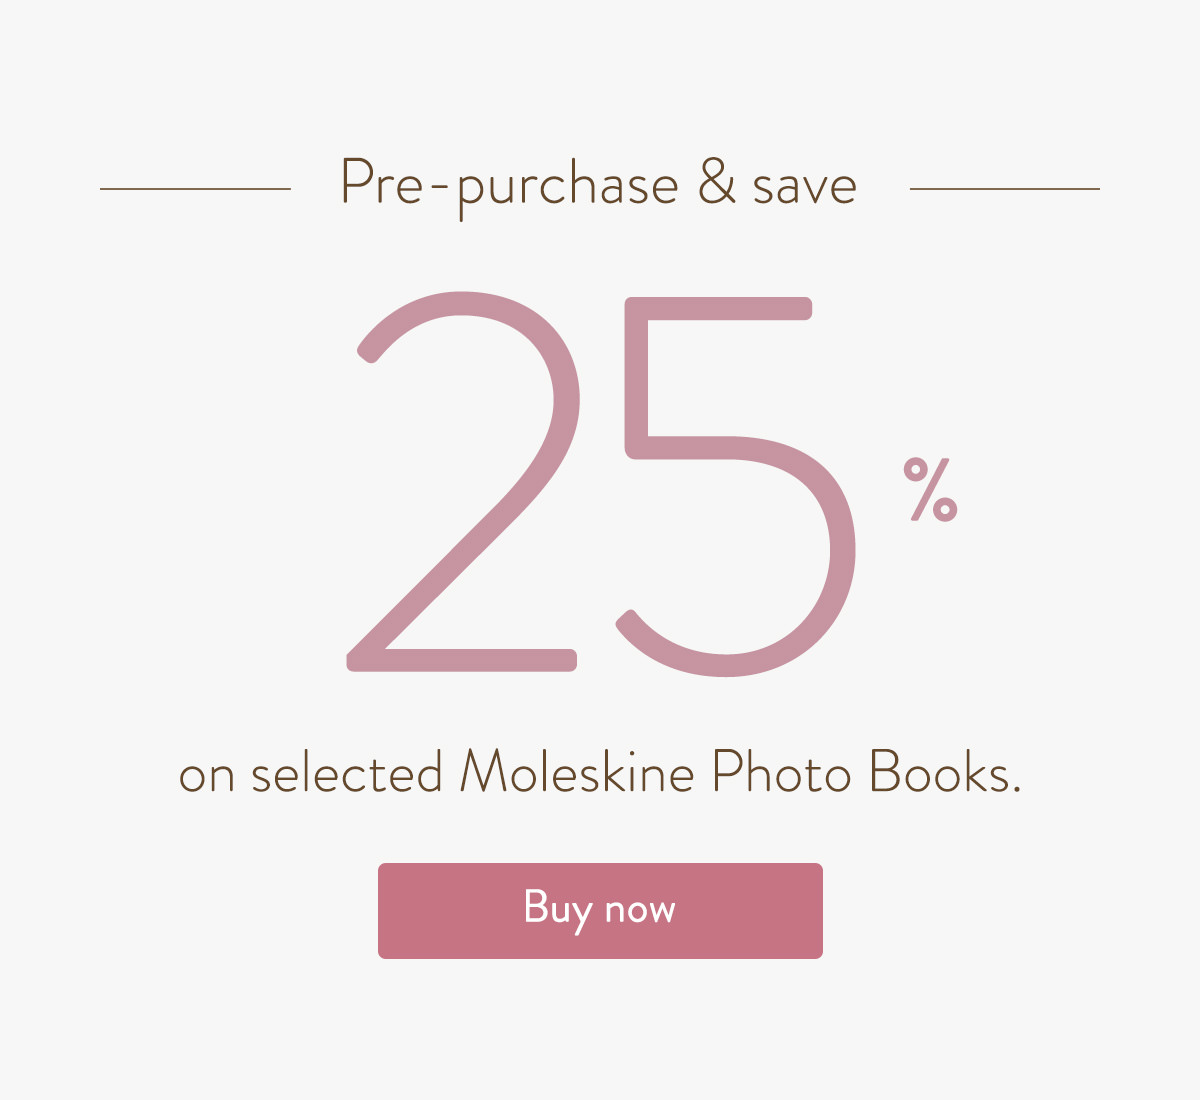 Pre-purchase and save 25% on selected Moleskine Photo Books.